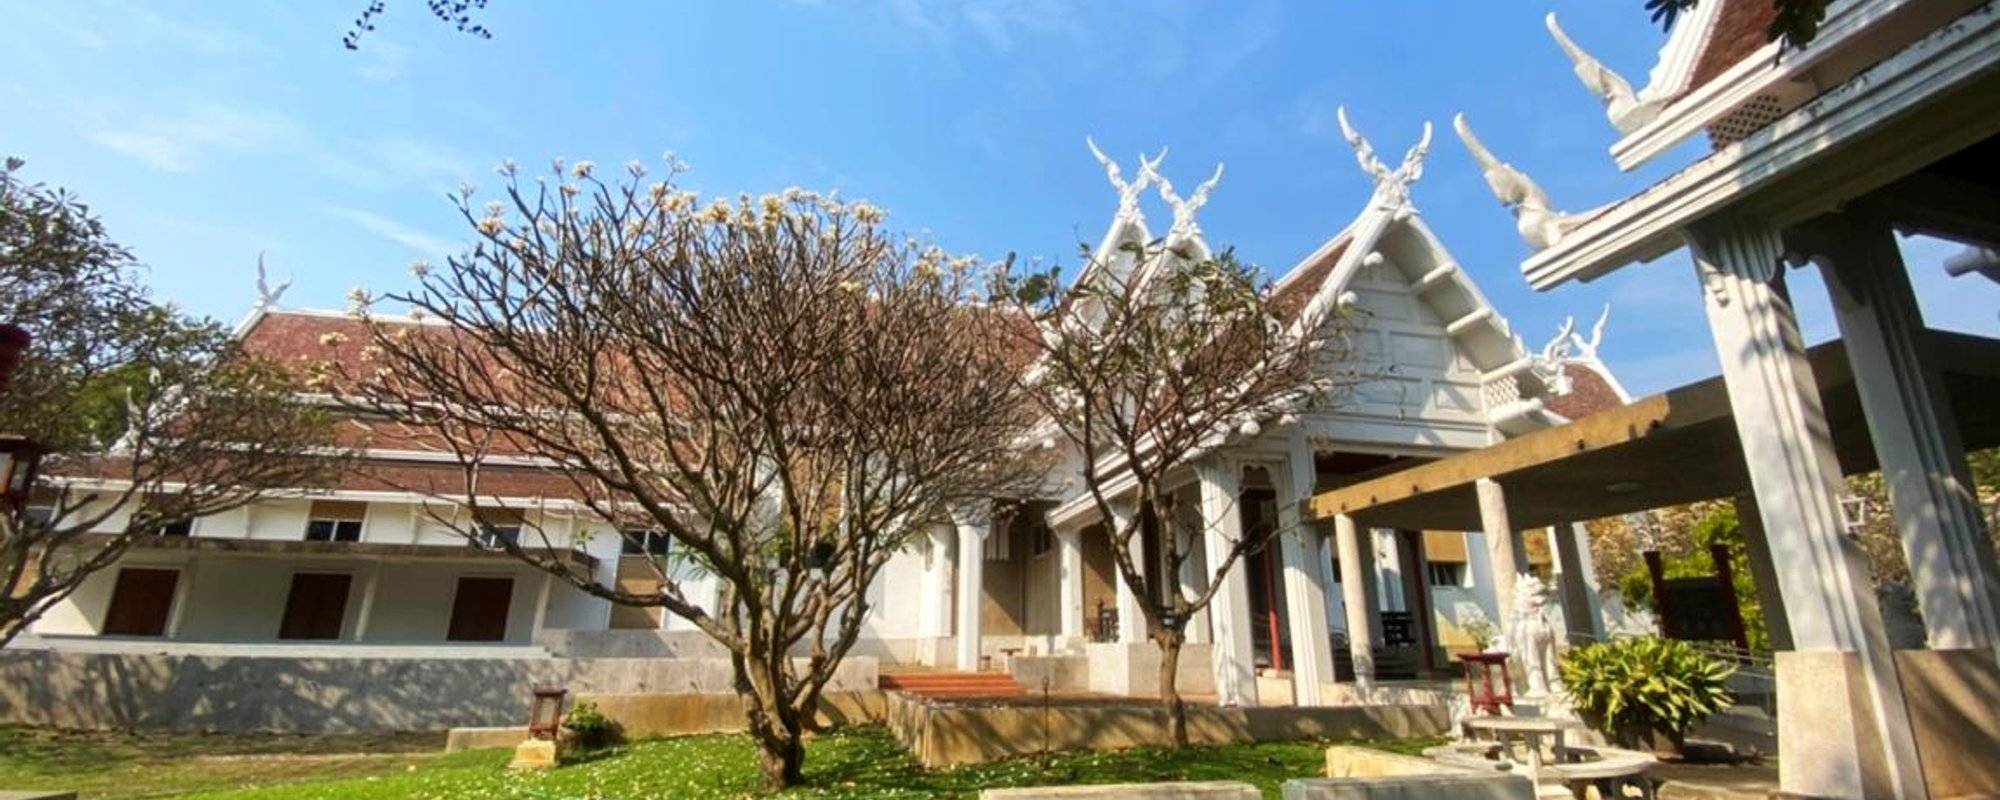 Travel Pro Places of Interest #286: Chiang Mai National Museum, Thailand! Part Eleven (9 photos)